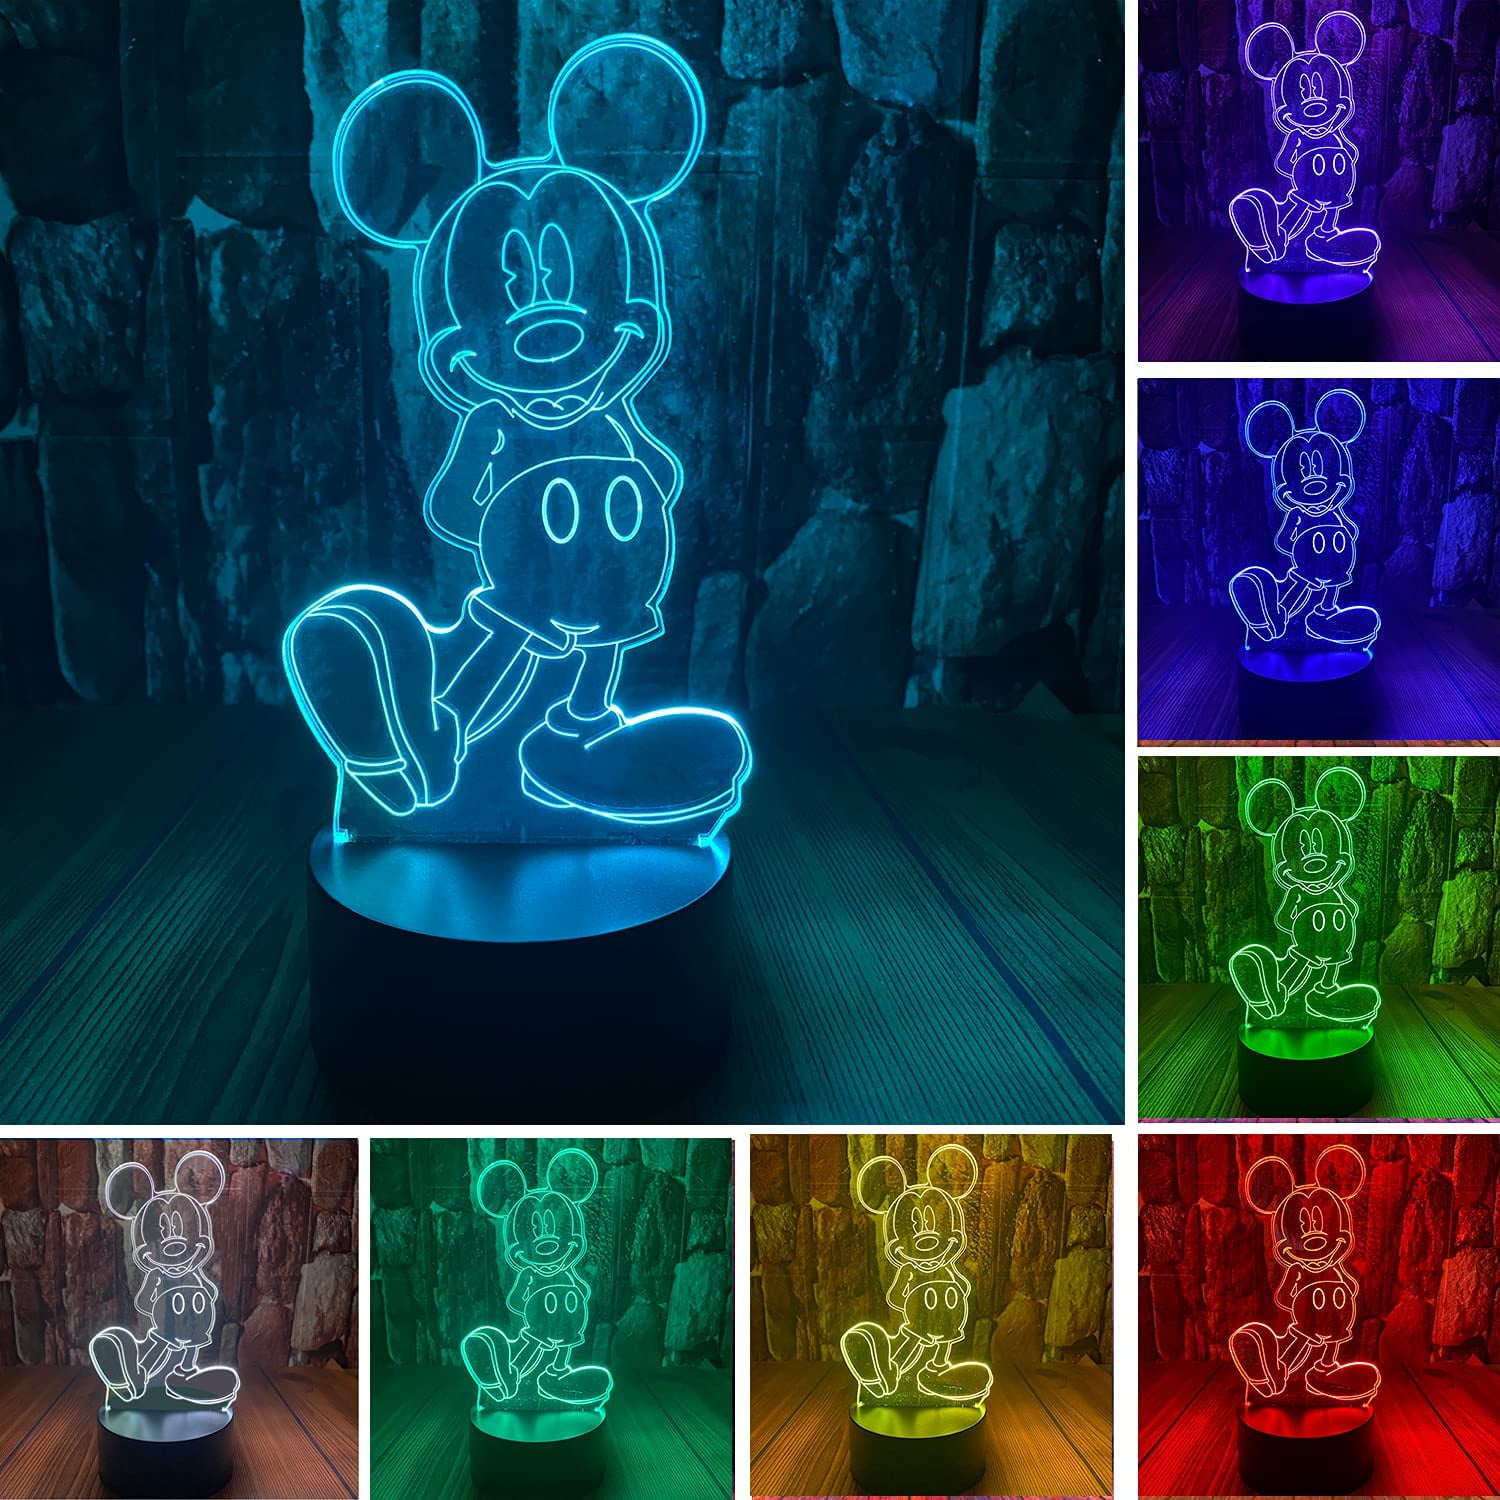 3D MINNIE MOUSE Acrylic LED 7 Colour Night Light Touch Table Desk Lamp Kids Gift 